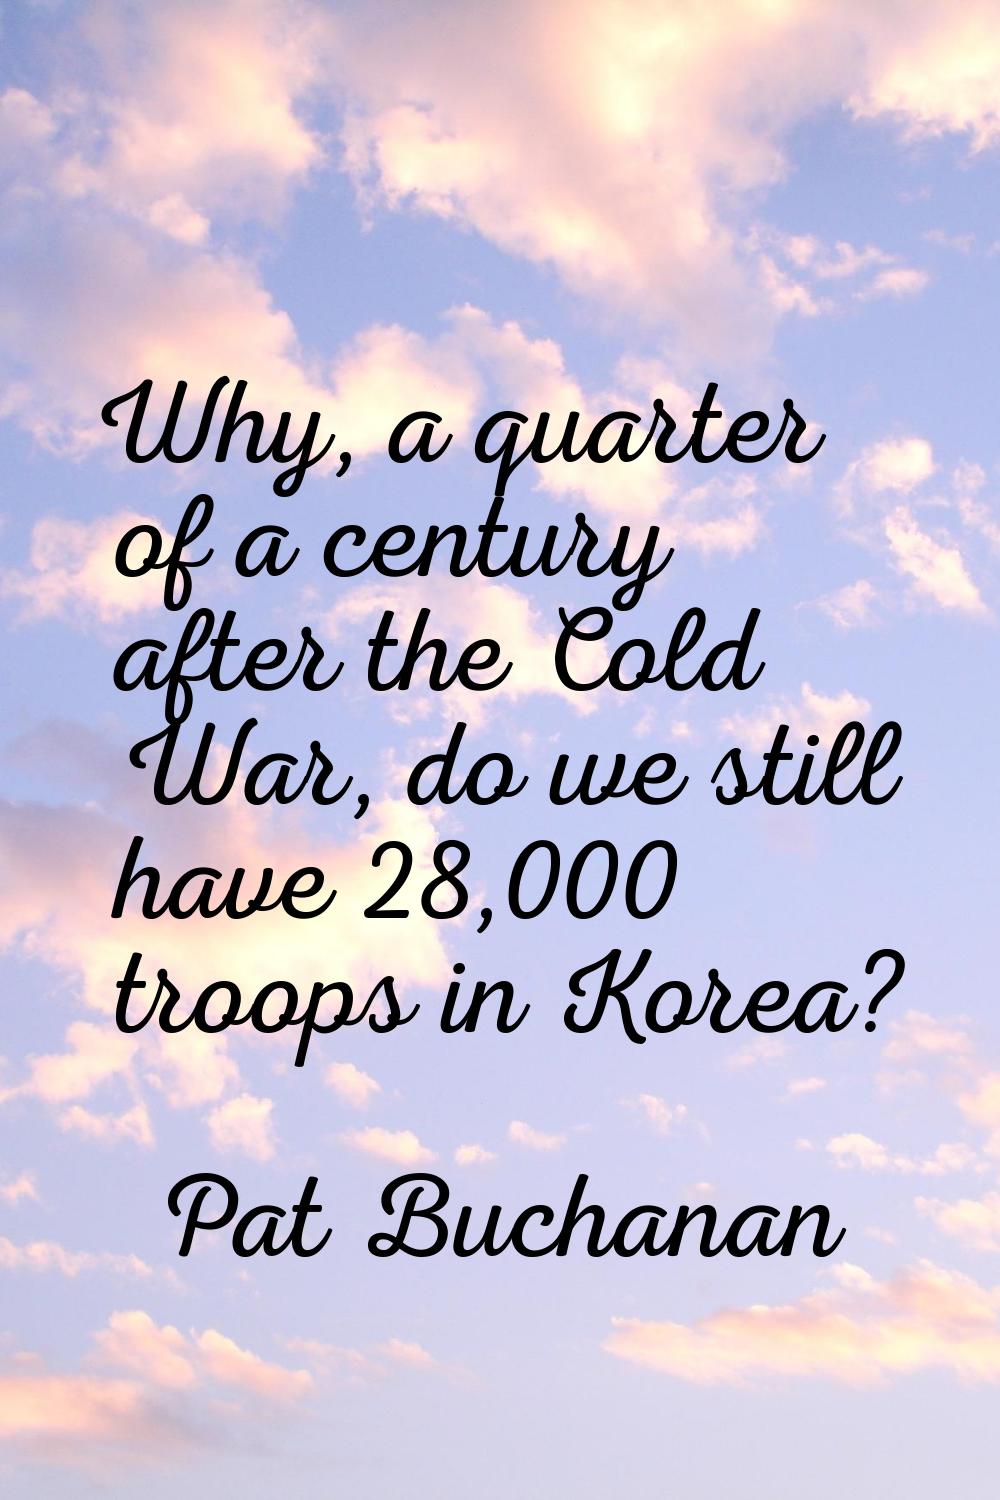 Why, a quarter of a century after the Cold War, do we still have 28,000 troops in Korea?